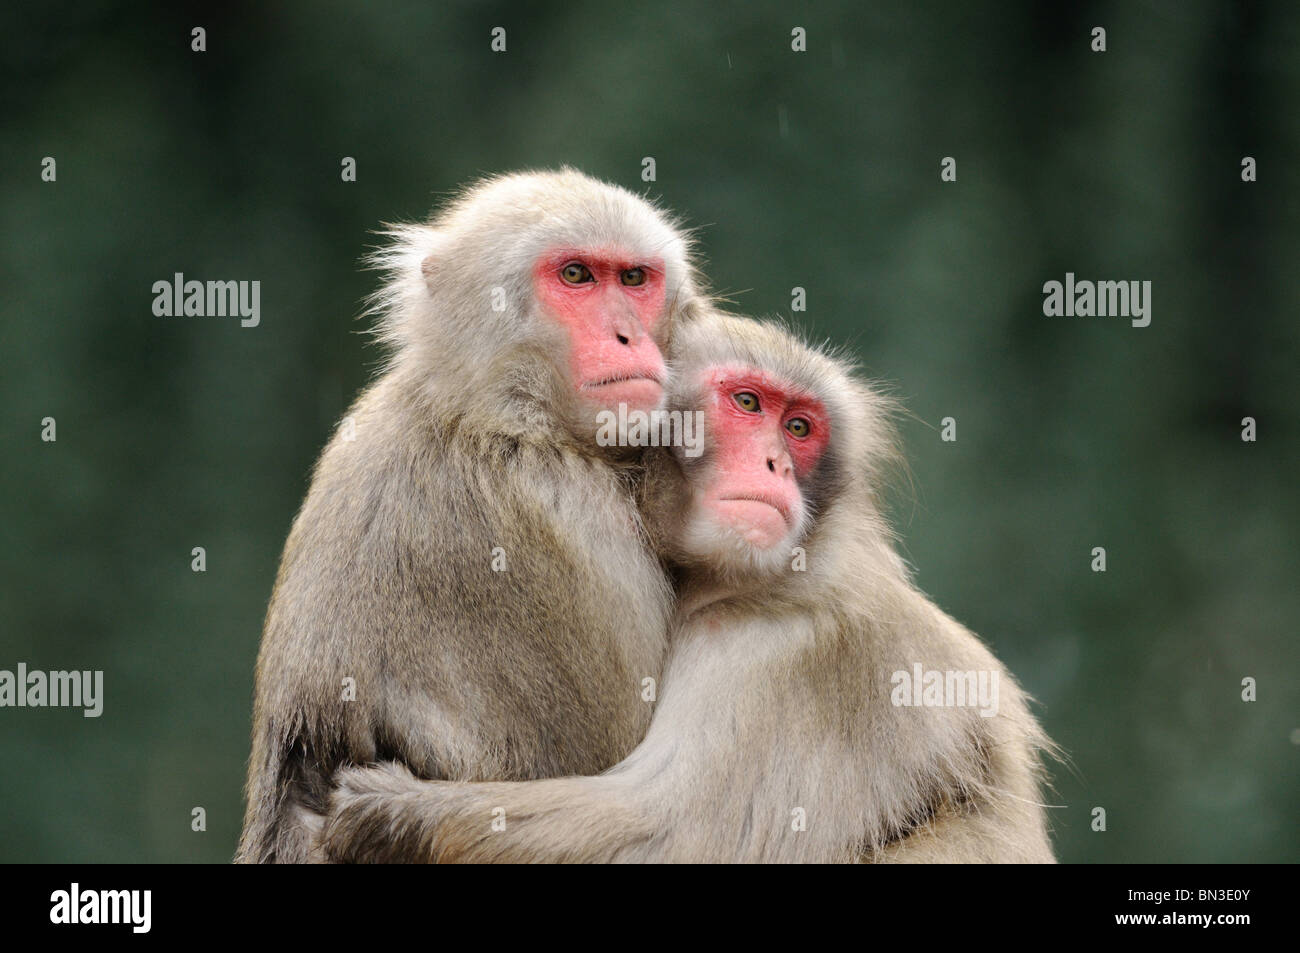 Two Red-faced makaks (Macaca fuscata) embracing each other Stock Photo